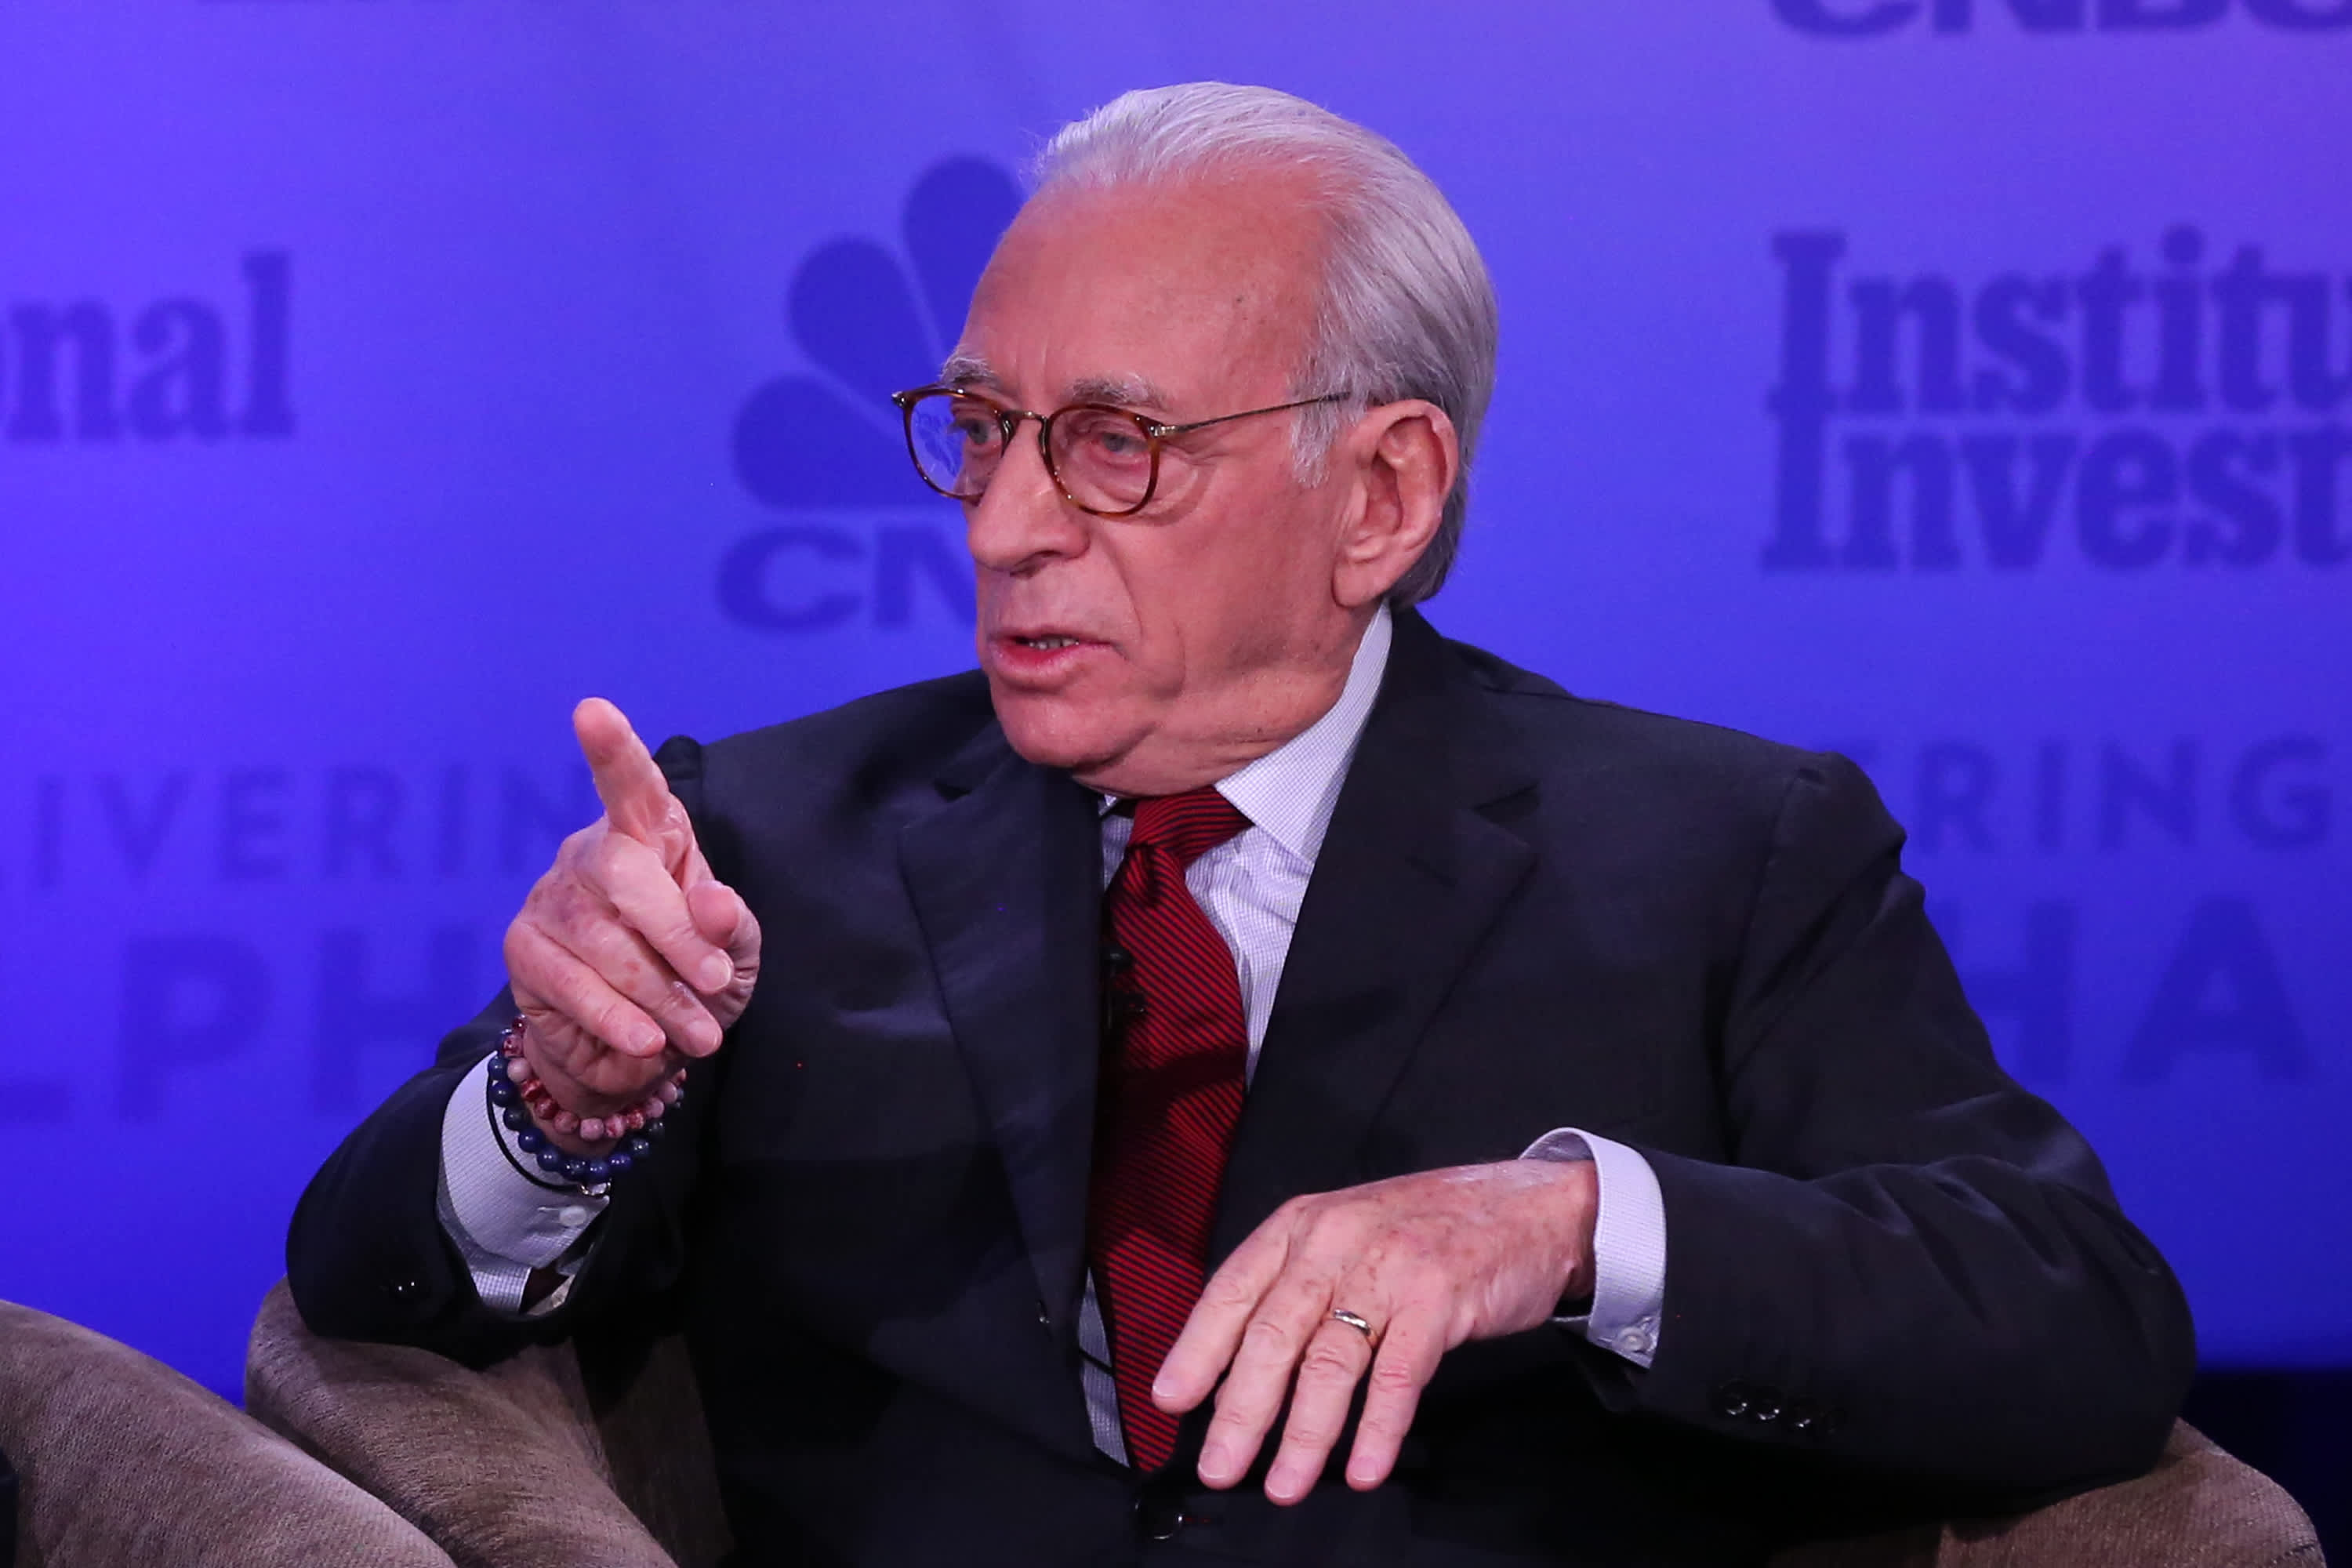 Disney could use an activist investor like Nelson Peltz to fix its financial house